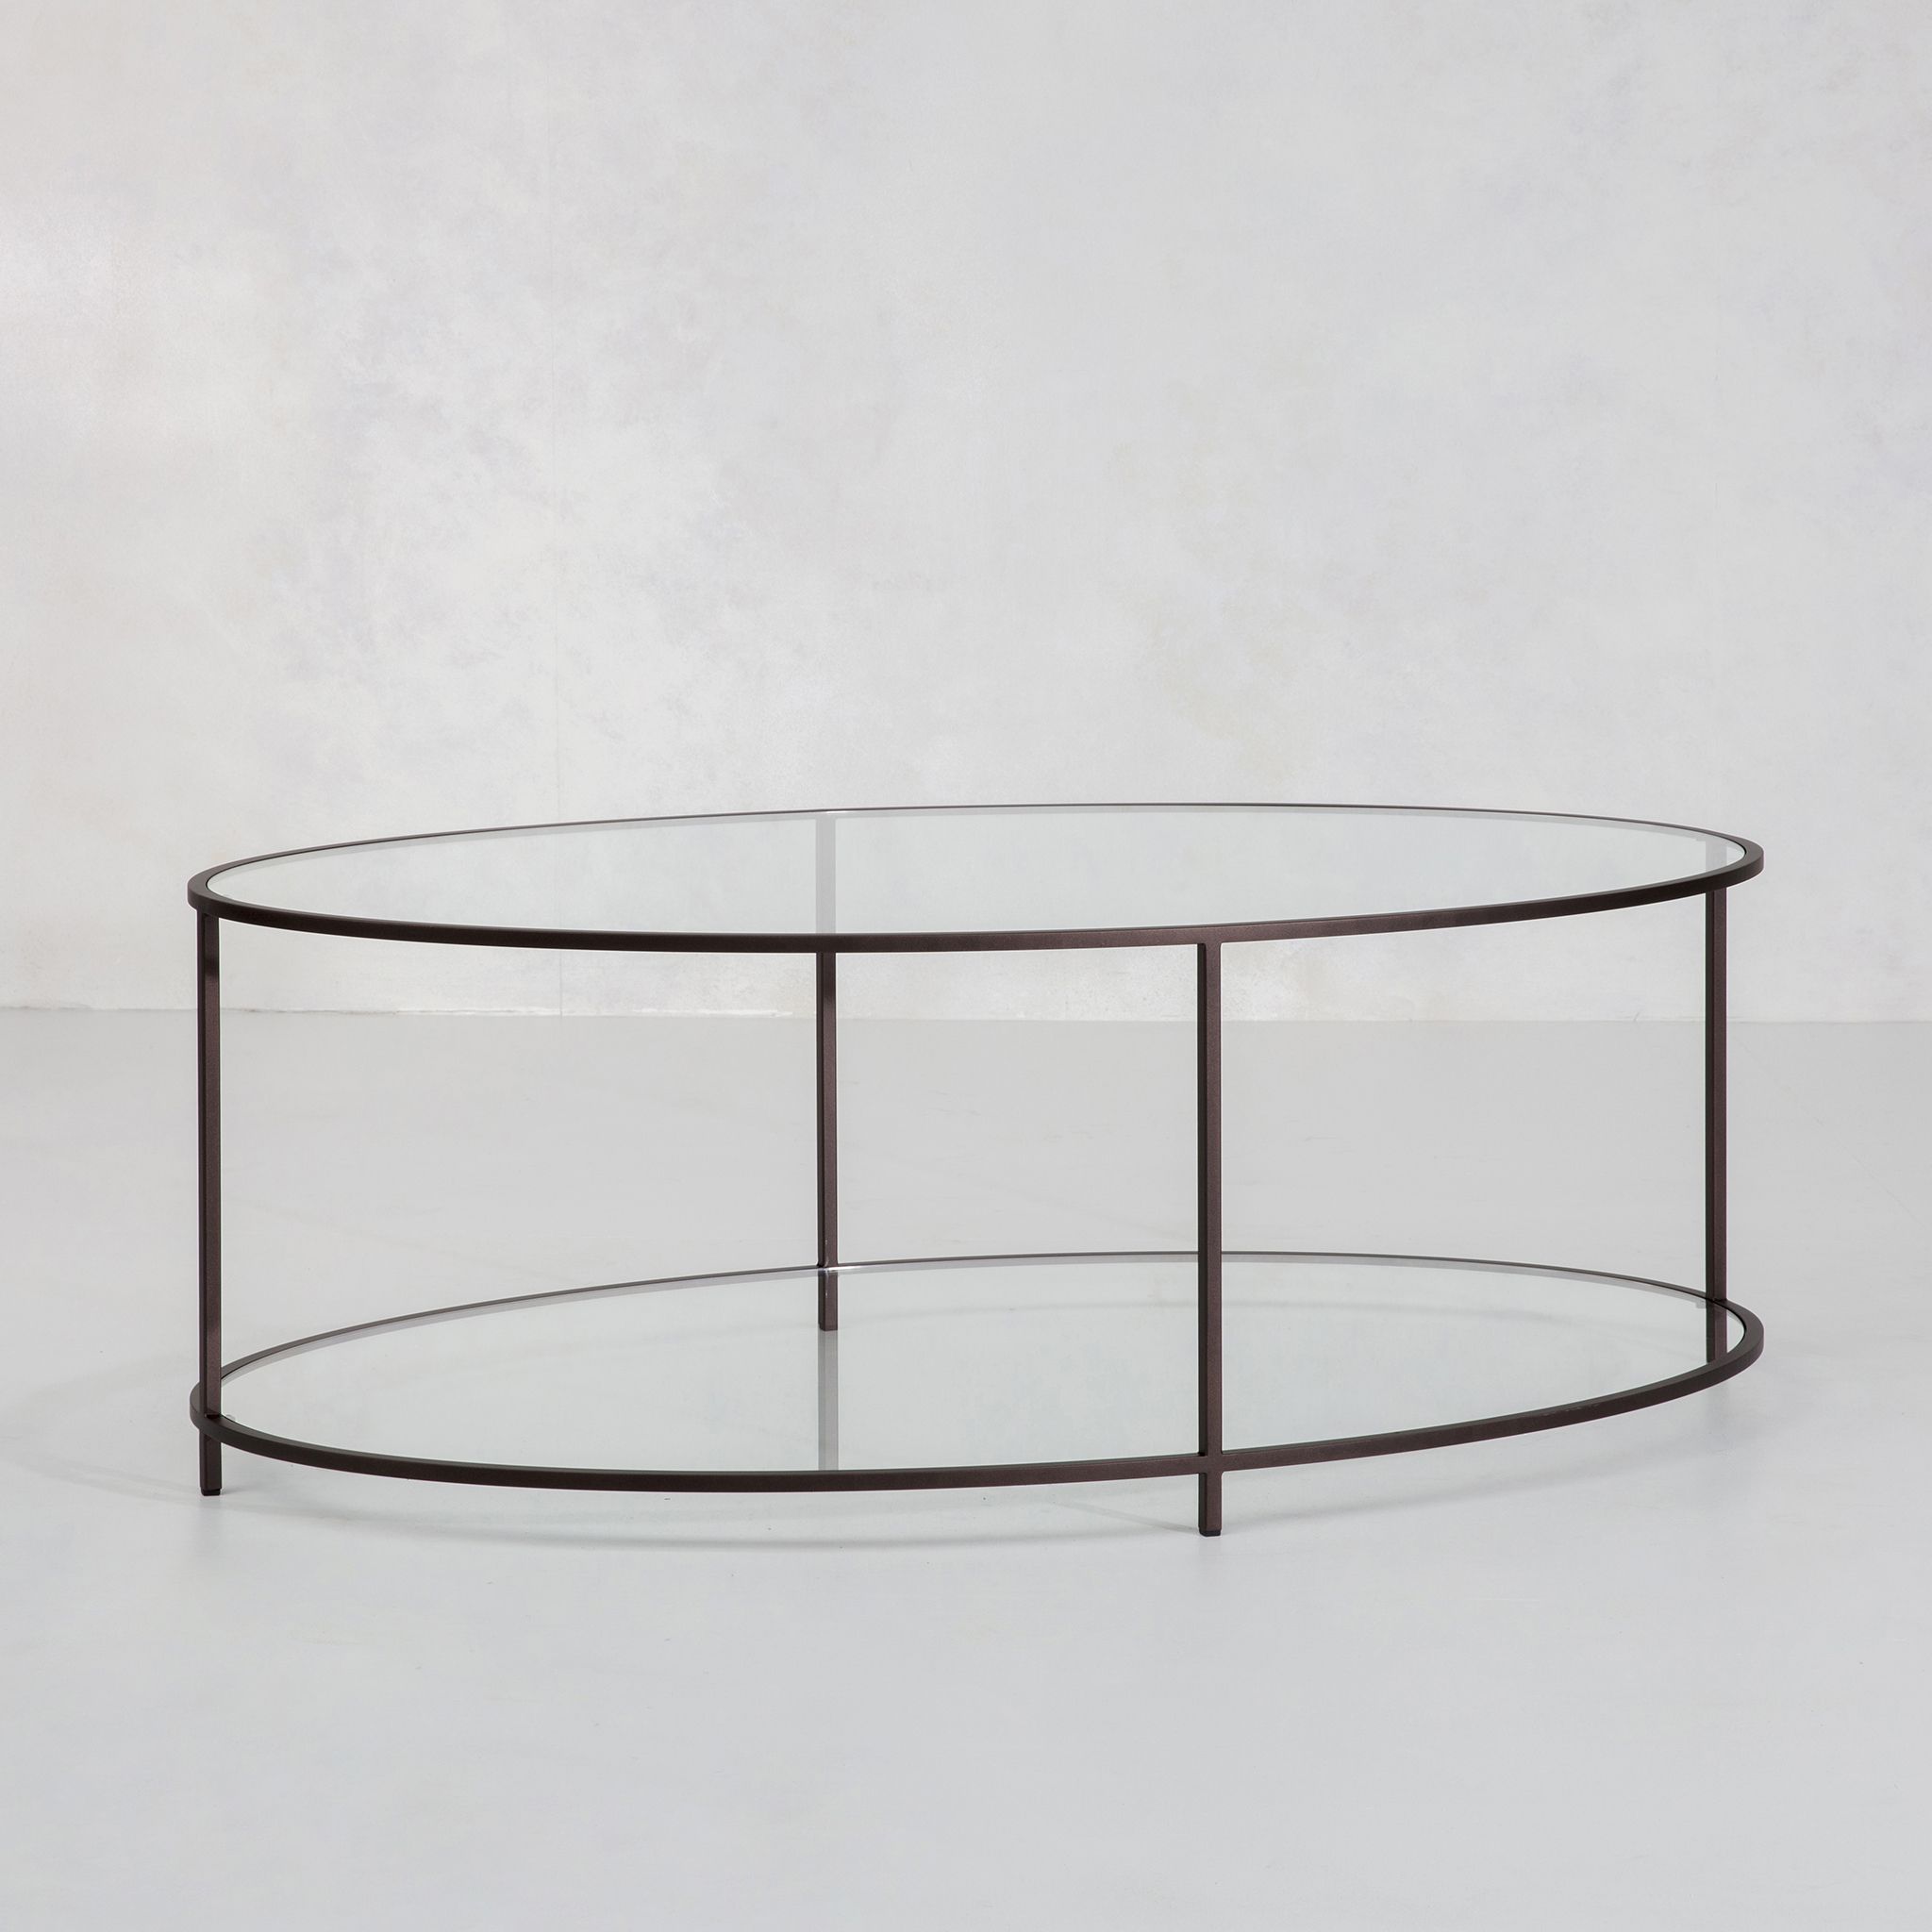 Lexington Oval/round Coffee Table – R Hughes Throughout Most Recent Glass Oval Coffee Tables (View 13 of 20)